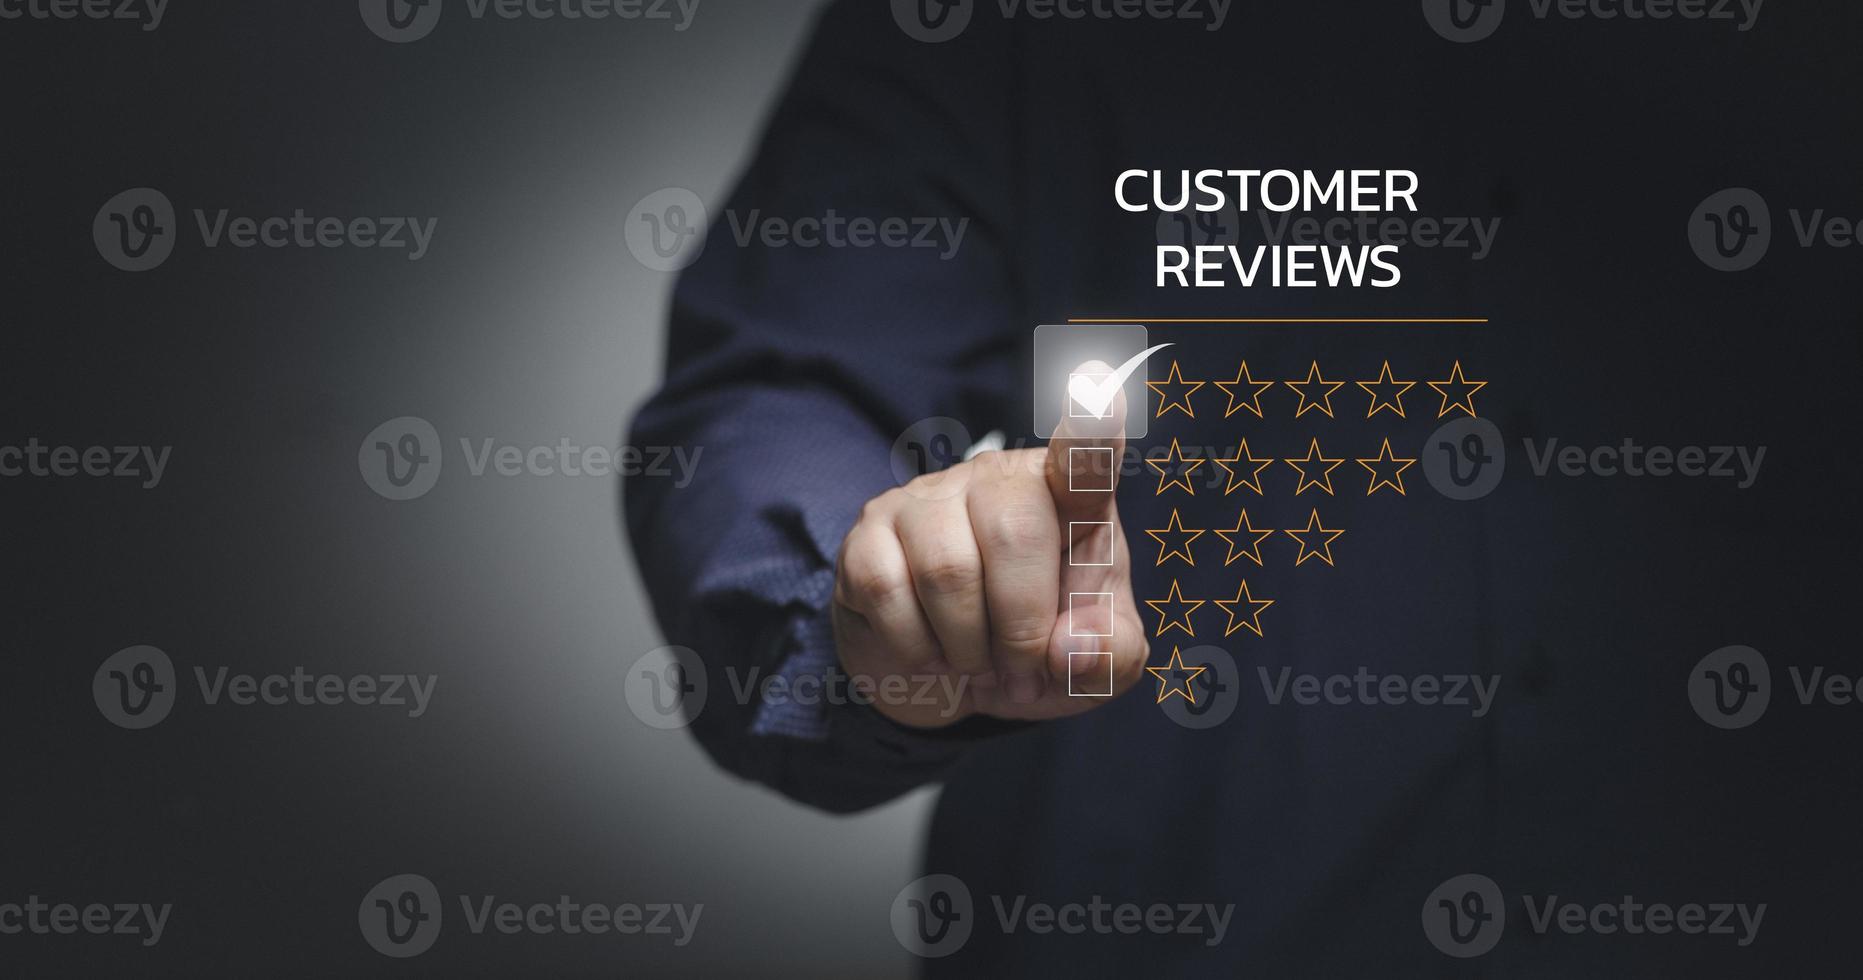 Customer service and Satisfaction concept ,Business people are touching the virtual screen on the happy Smiley face icon to give satisfaction in service. rating very impressed. photo